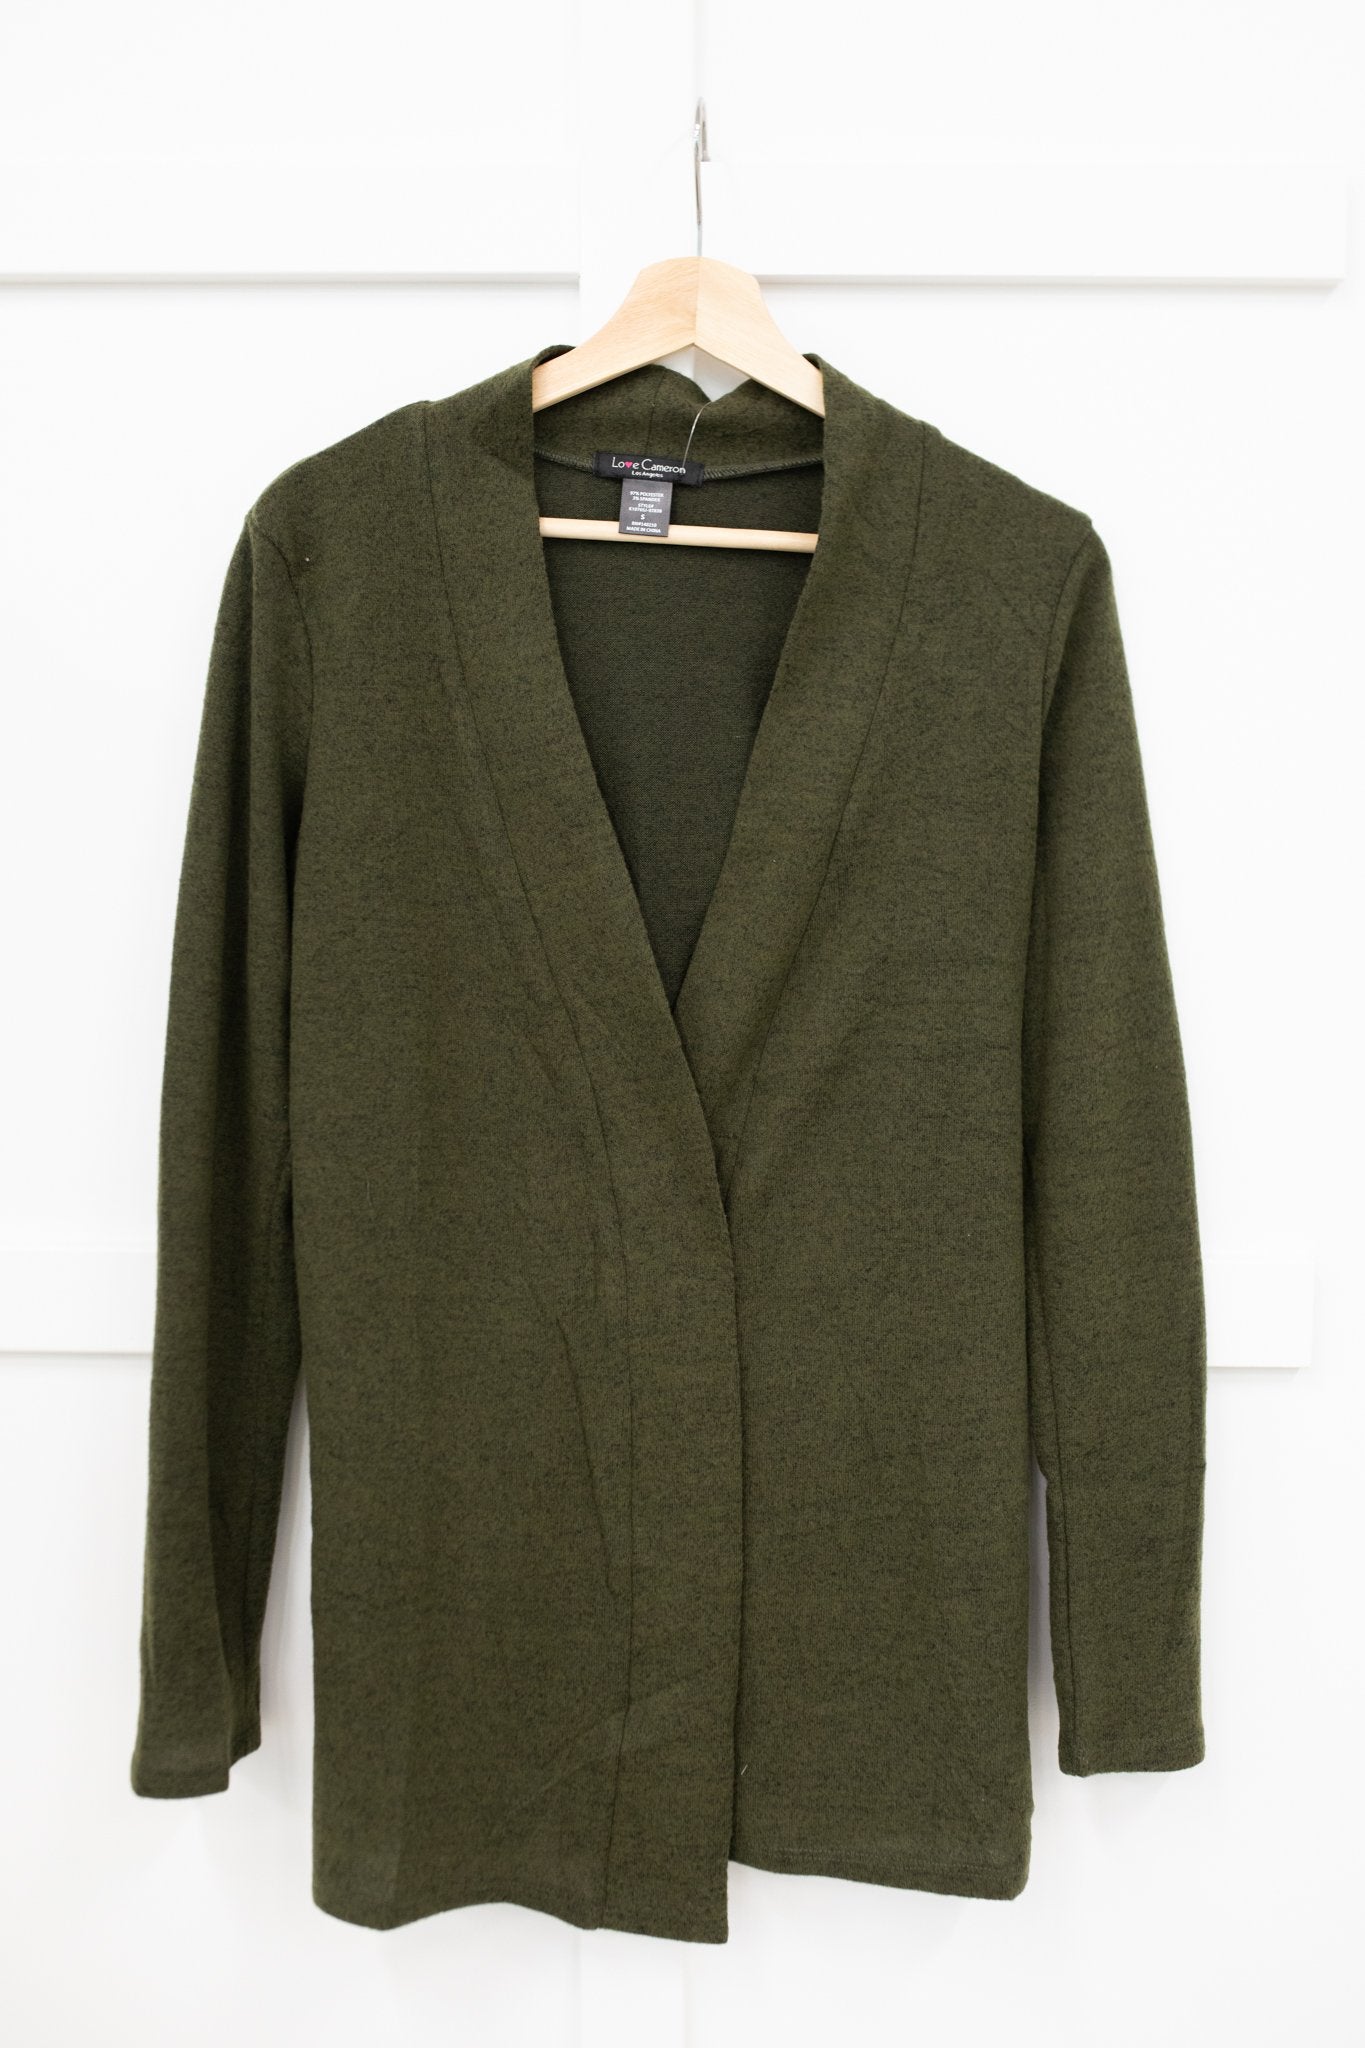 Sienna Sweater knit Cardigan In Olive (Online Exclusive)